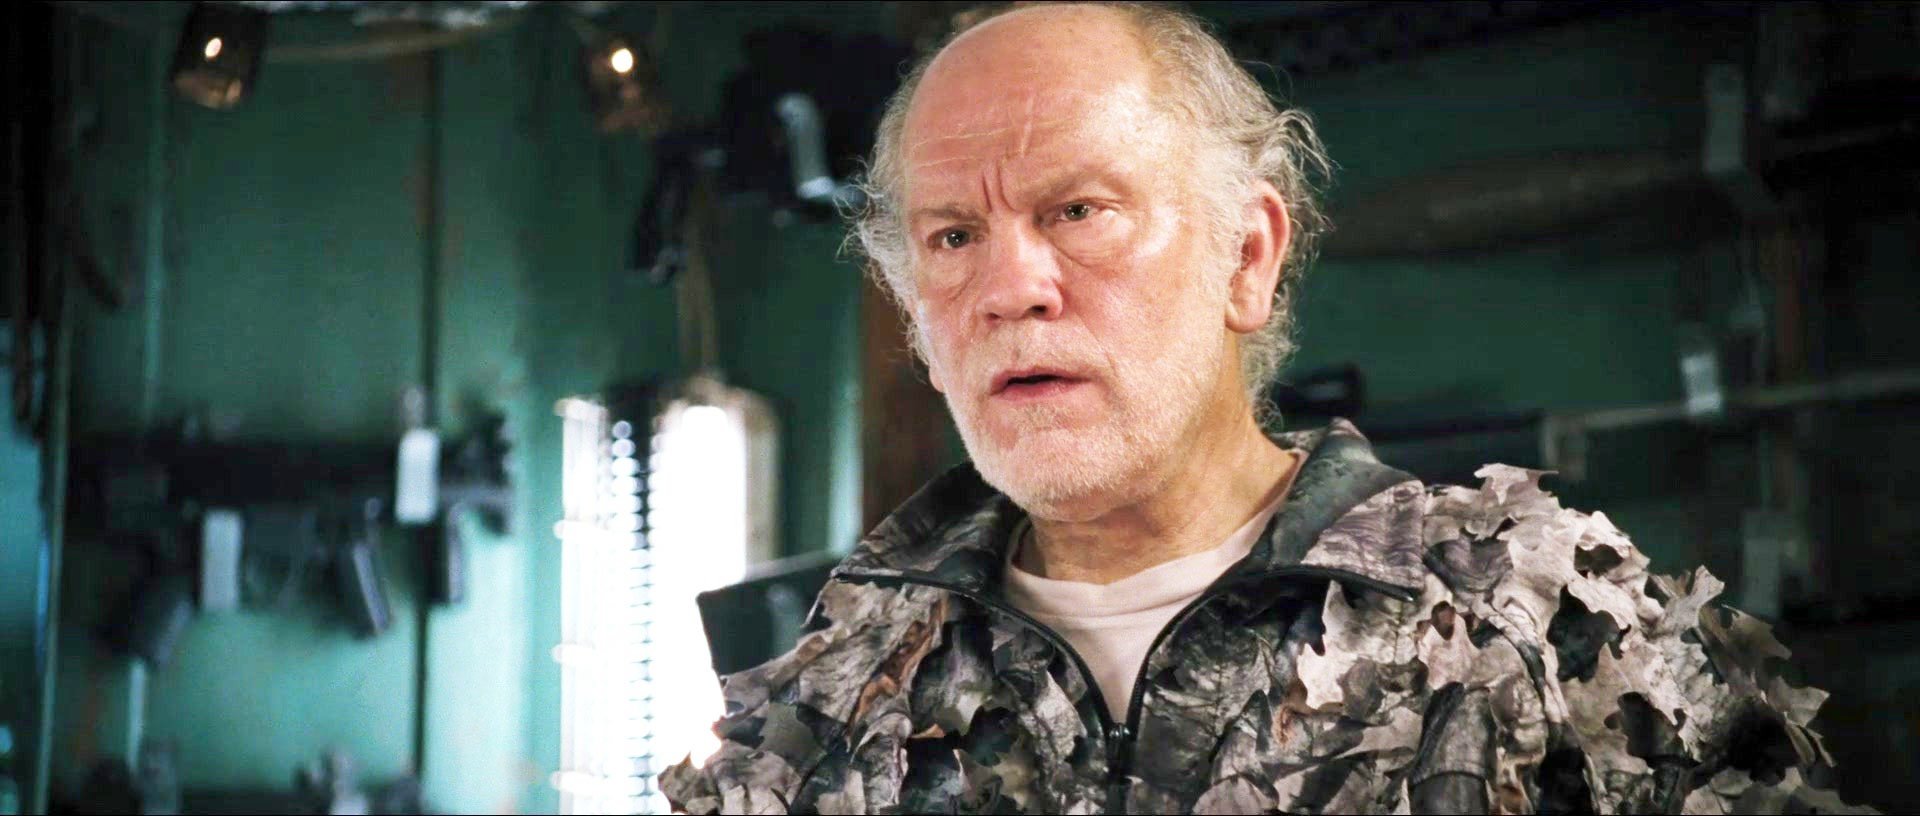 John Malkovich stars as Marvin Boggs in Summit Entertainment's Red (2010)